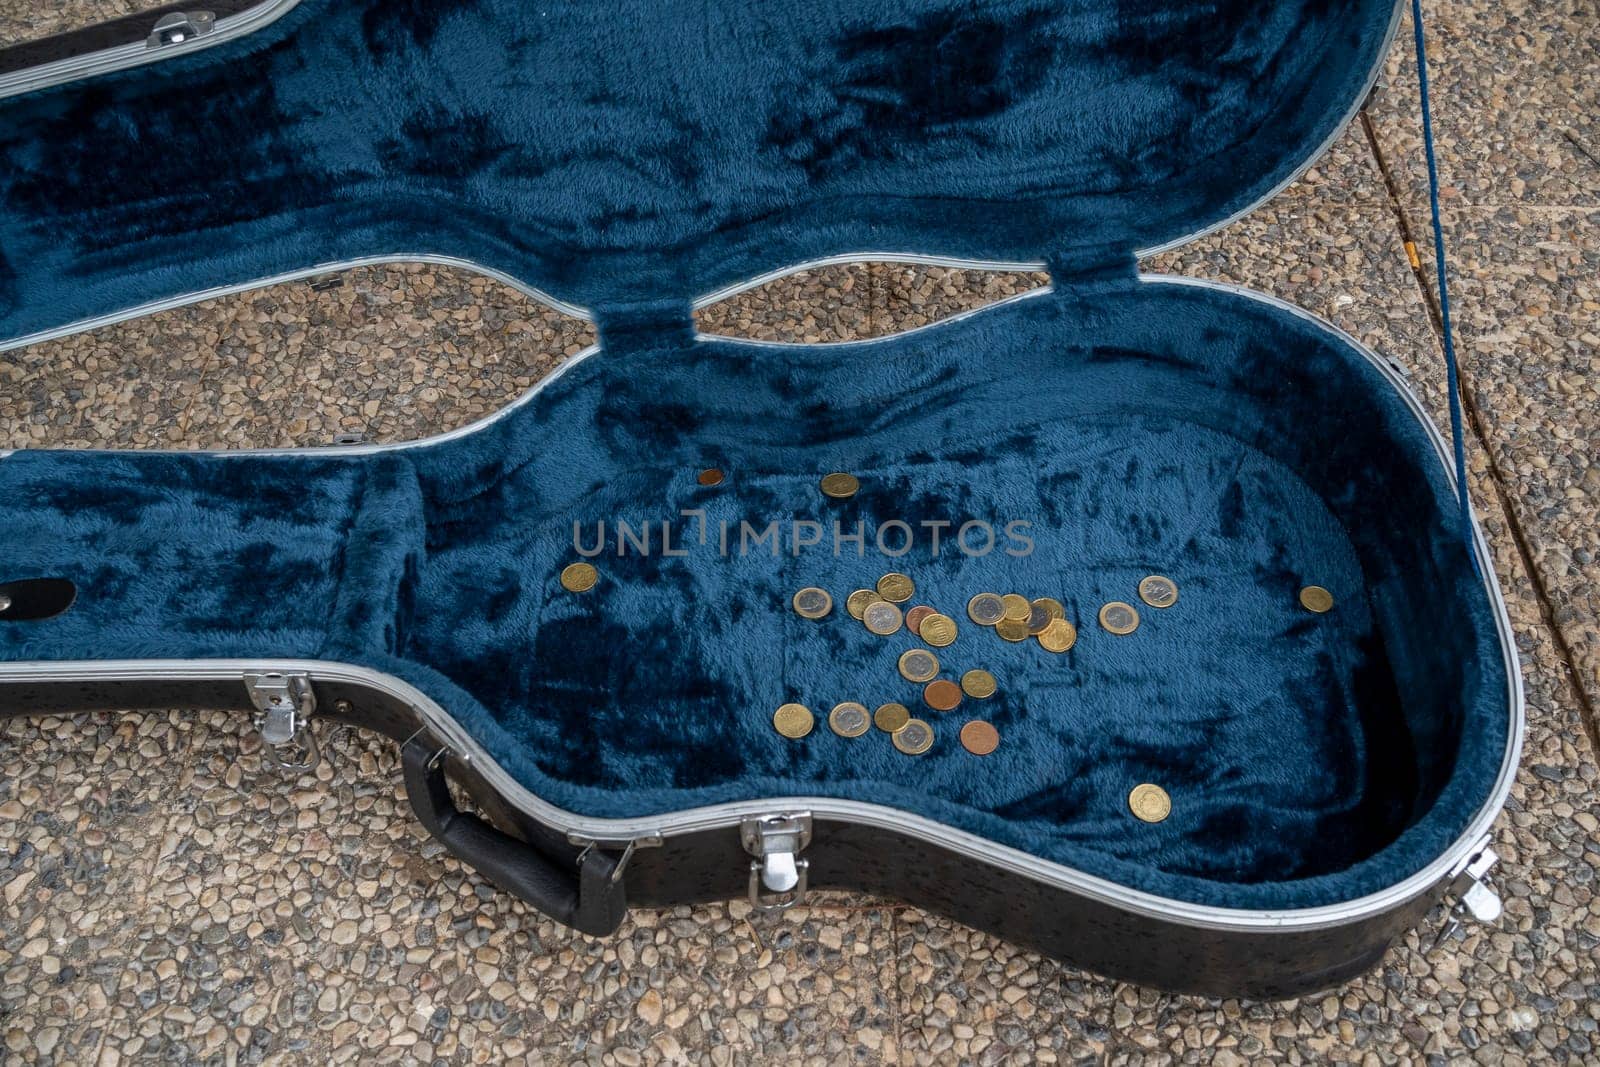 Top view of black opened guitar case with golden coins placed on asphalt pavement during live concert of street performer